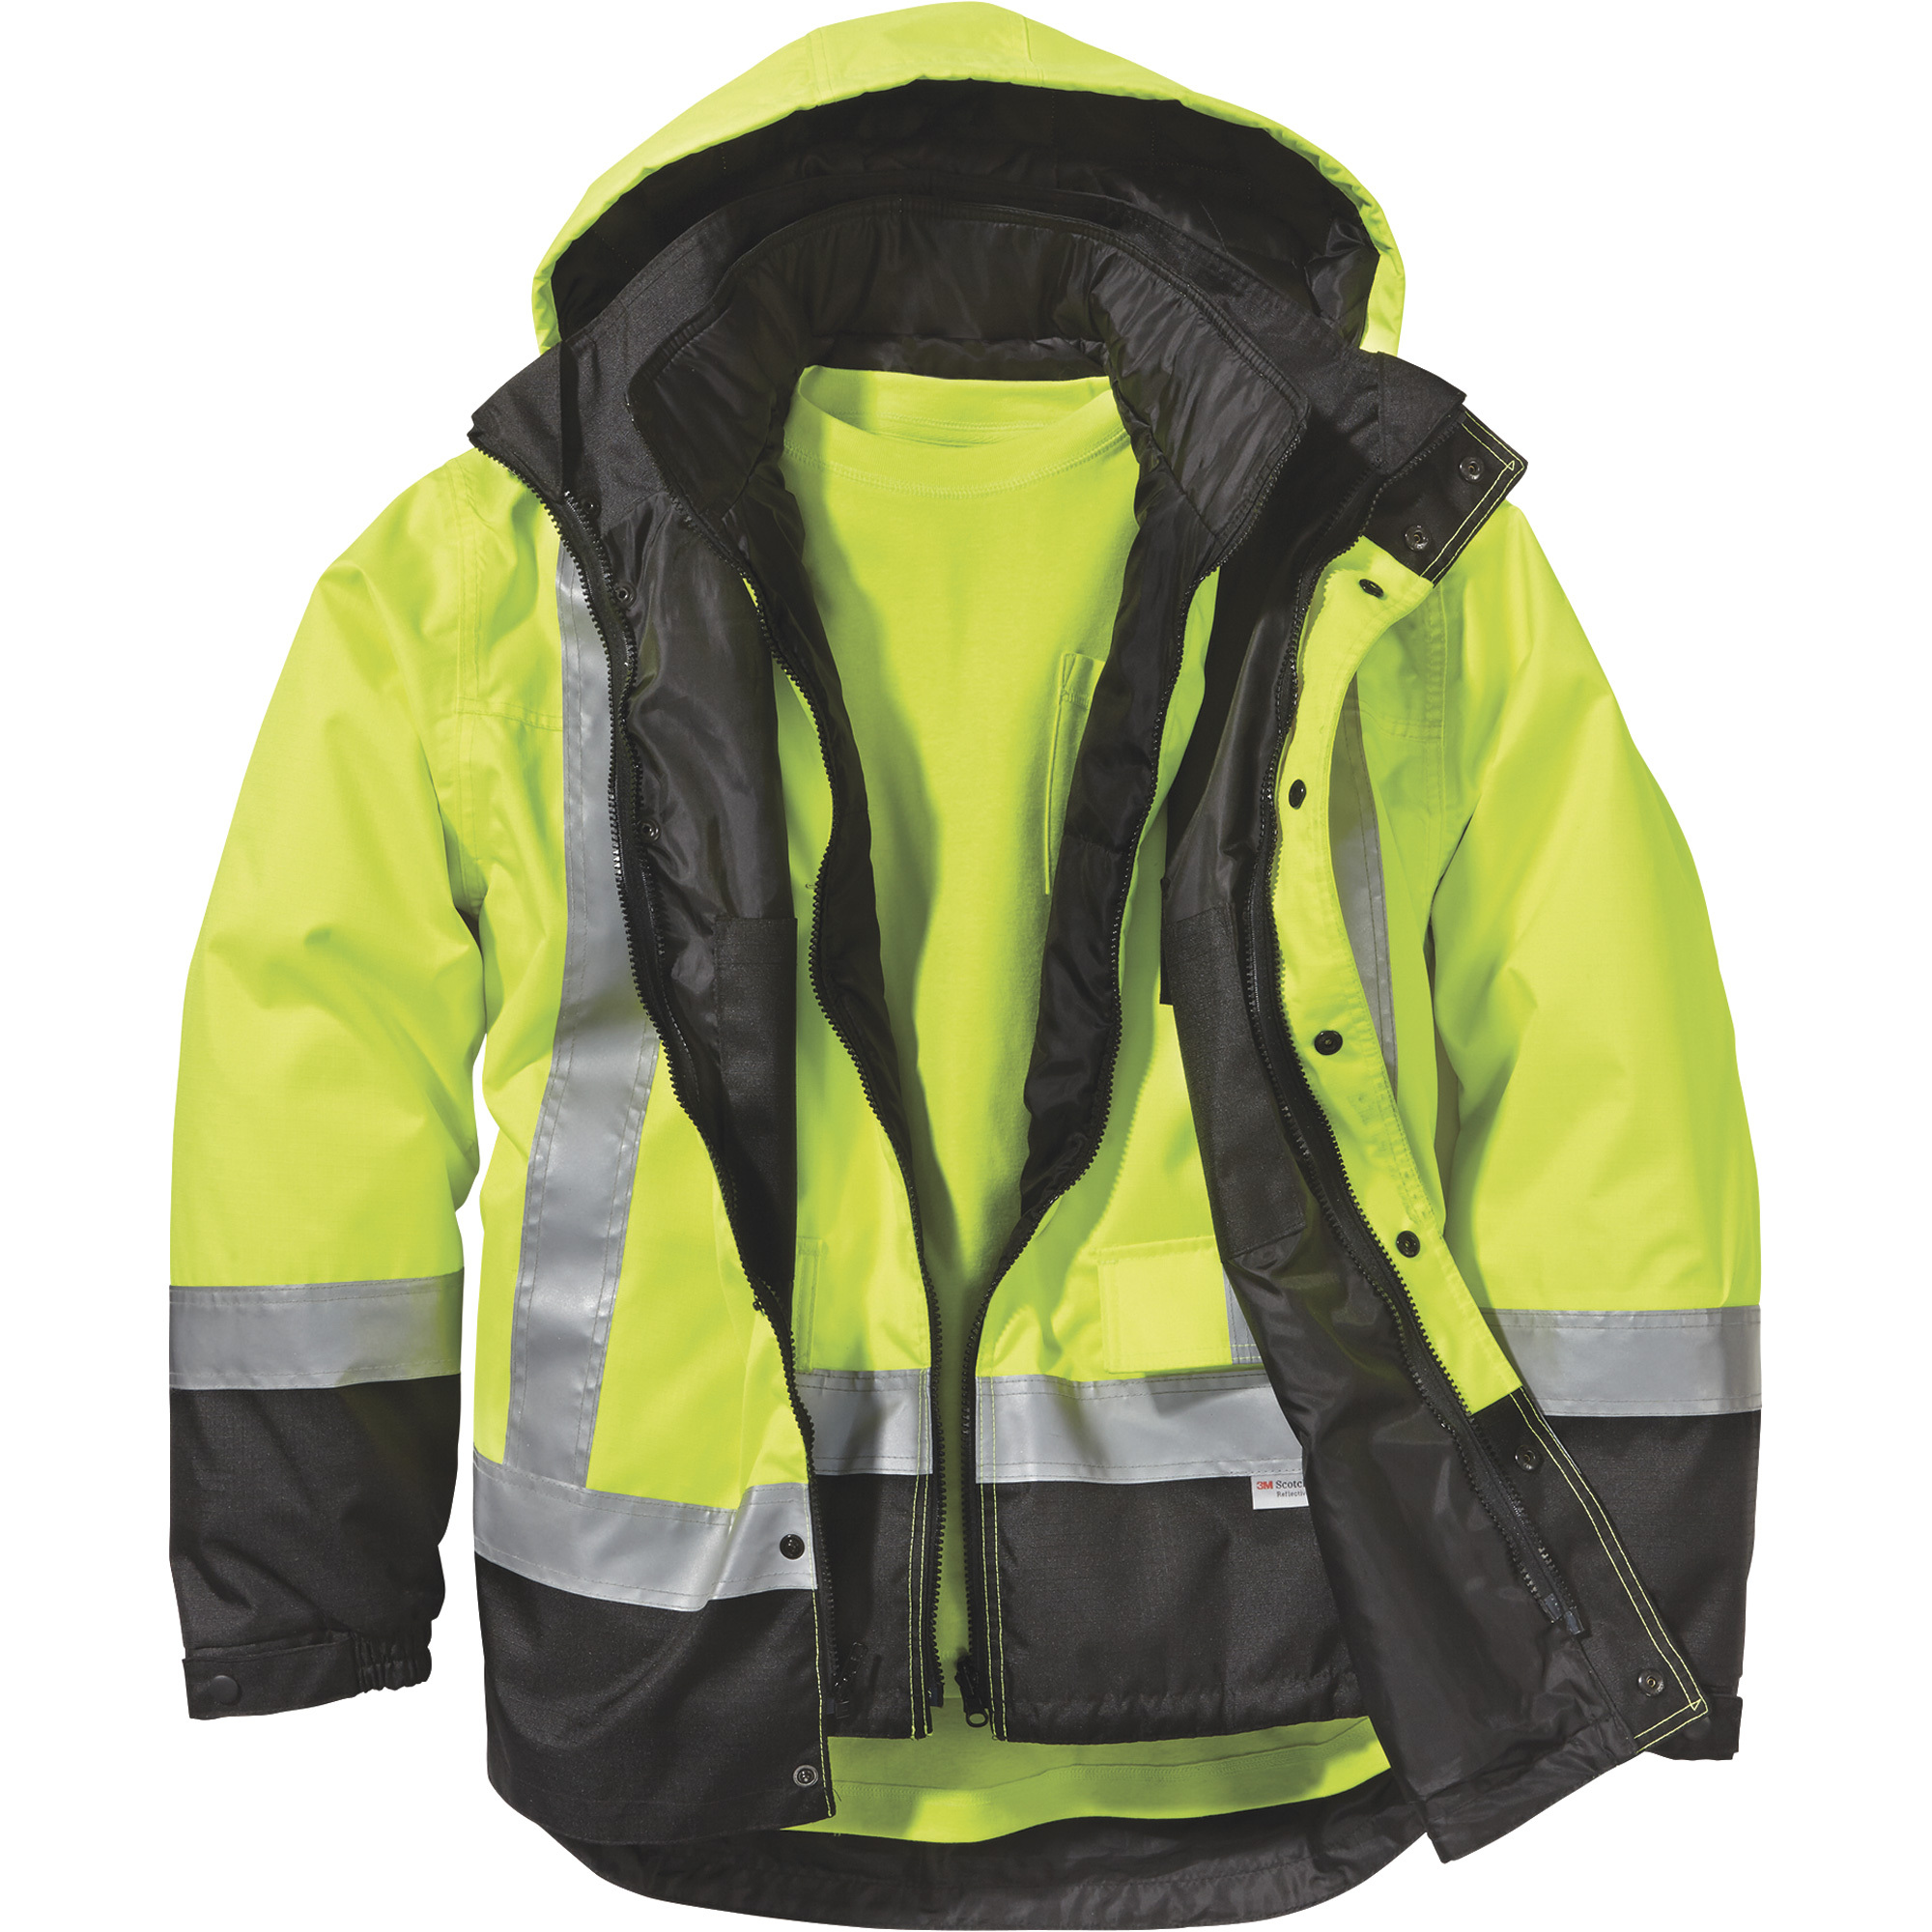 Gravel Gear Men's Class 3 High Visibility 4-in-1 Parka with Reflective Material â Lime, 4XL